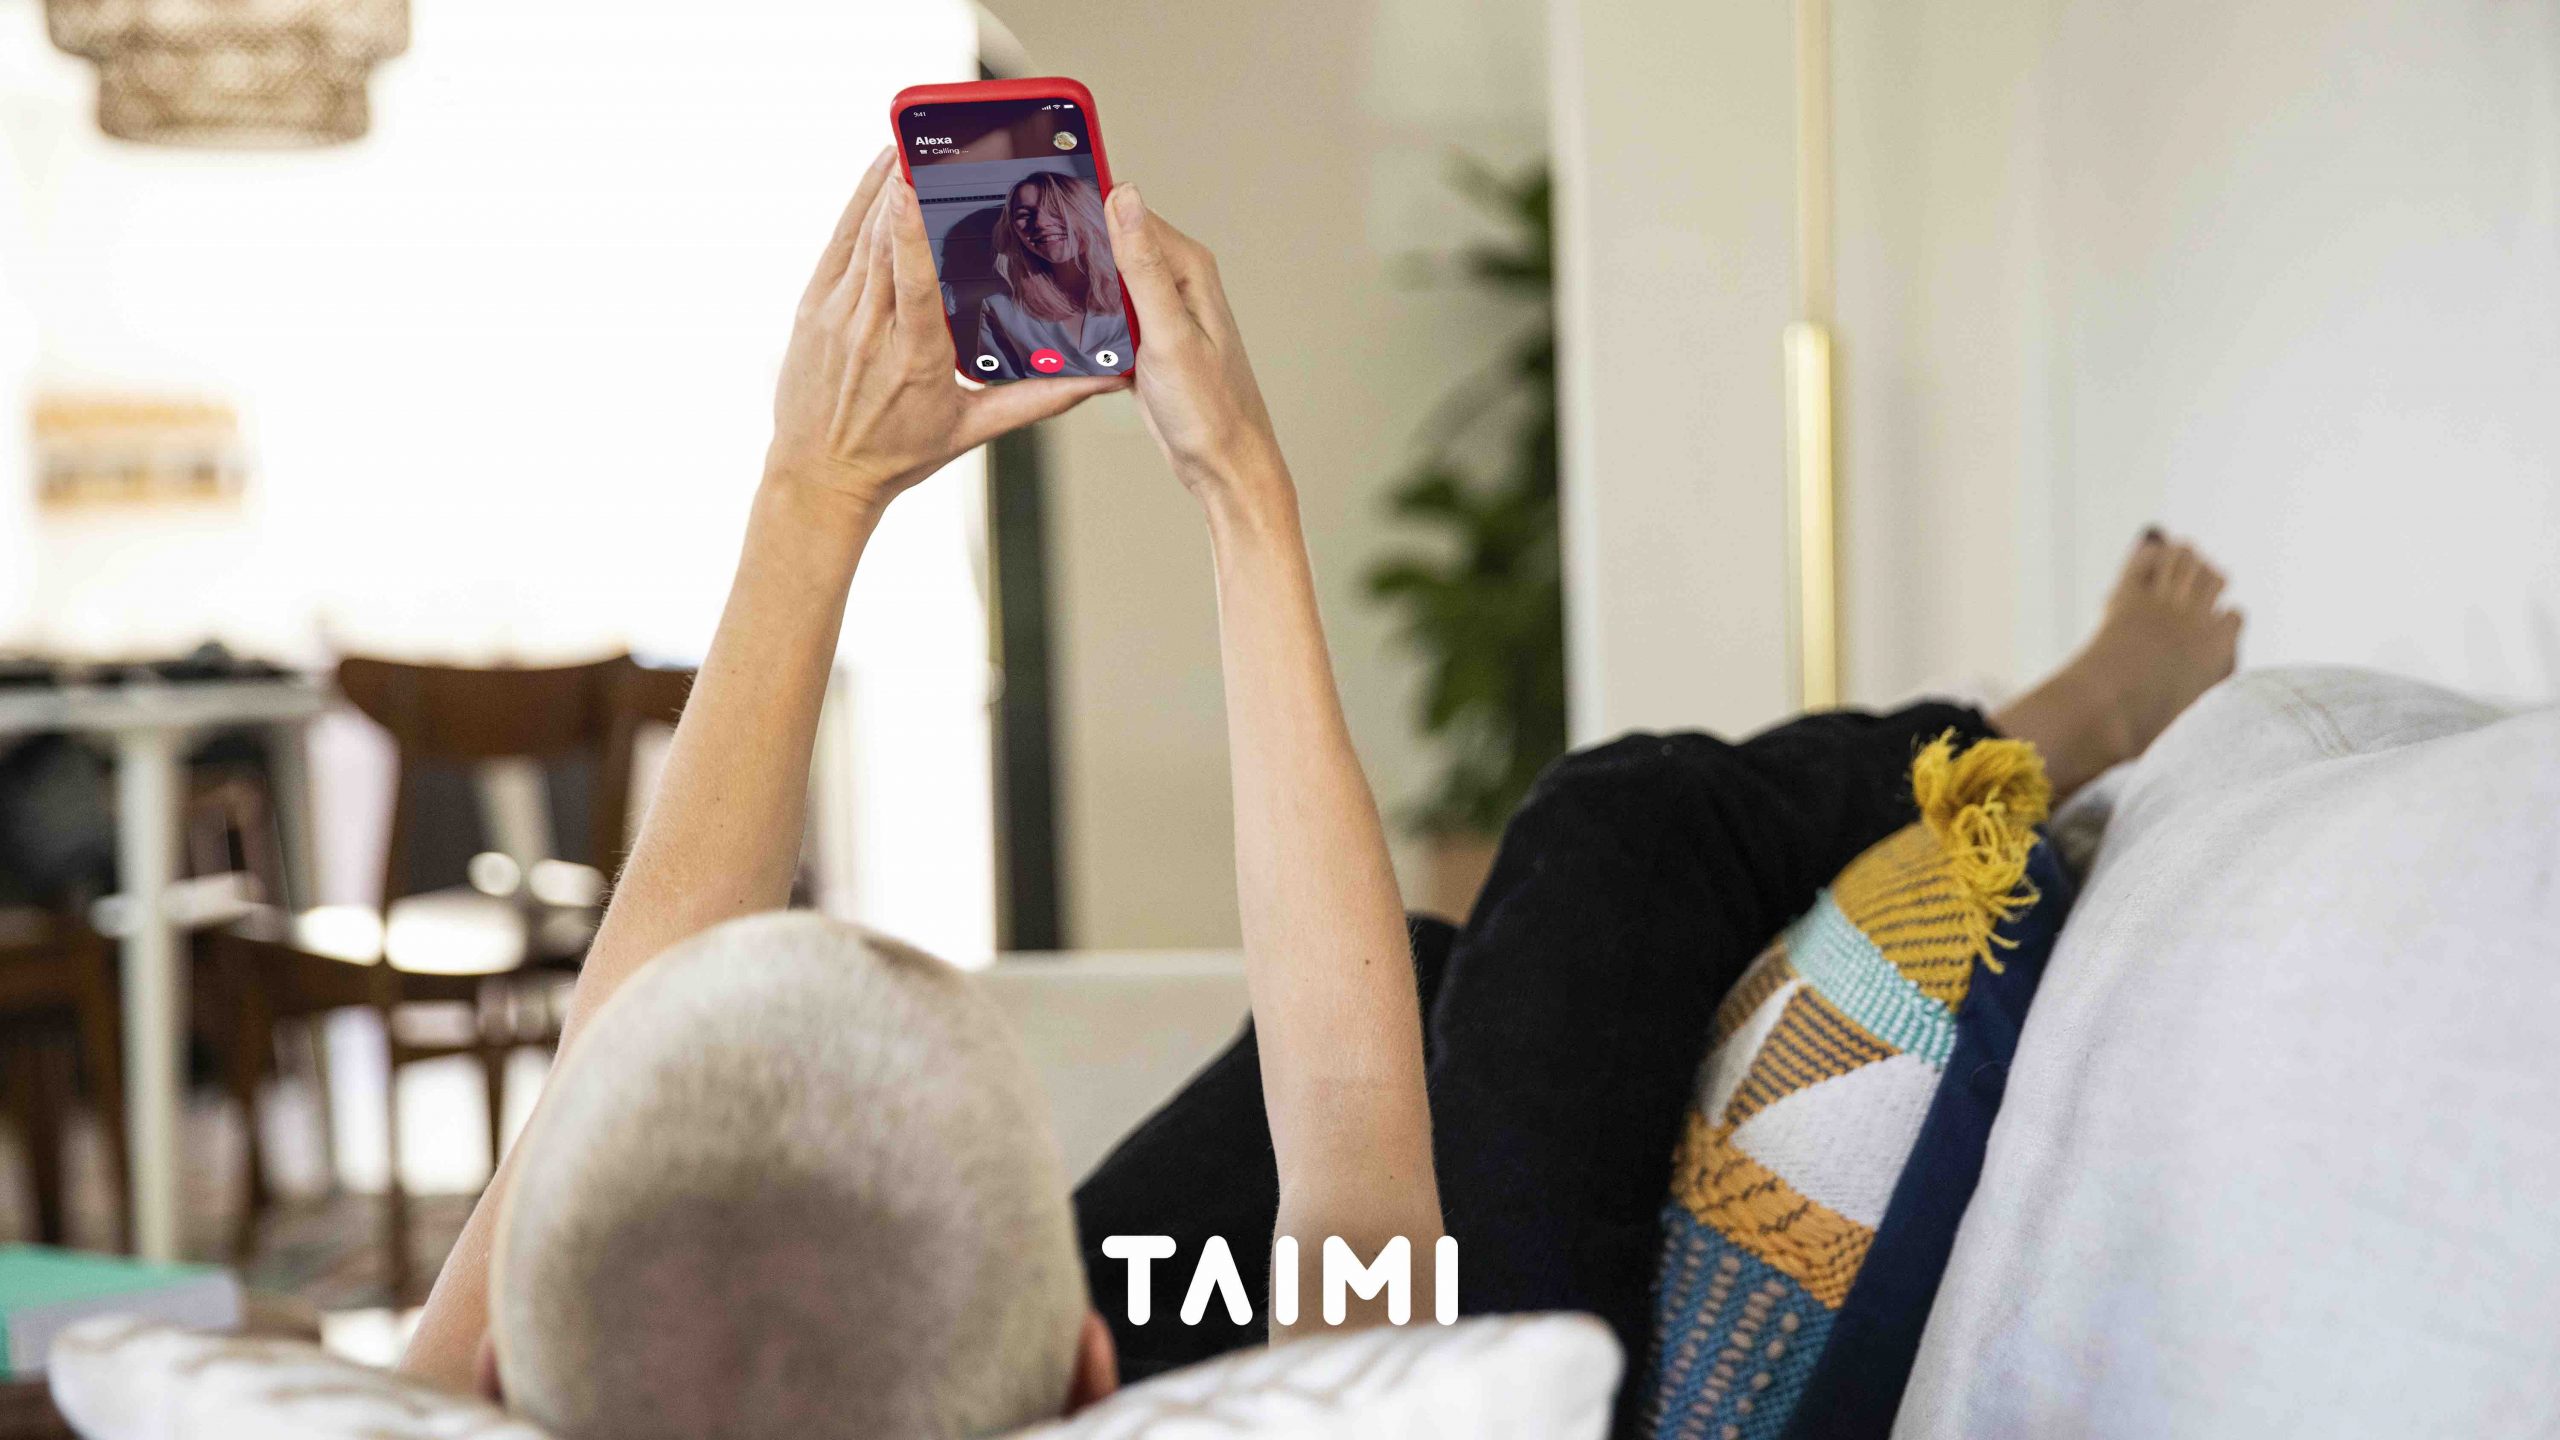 TAIMI reminds dating app users to social distance and video call each other